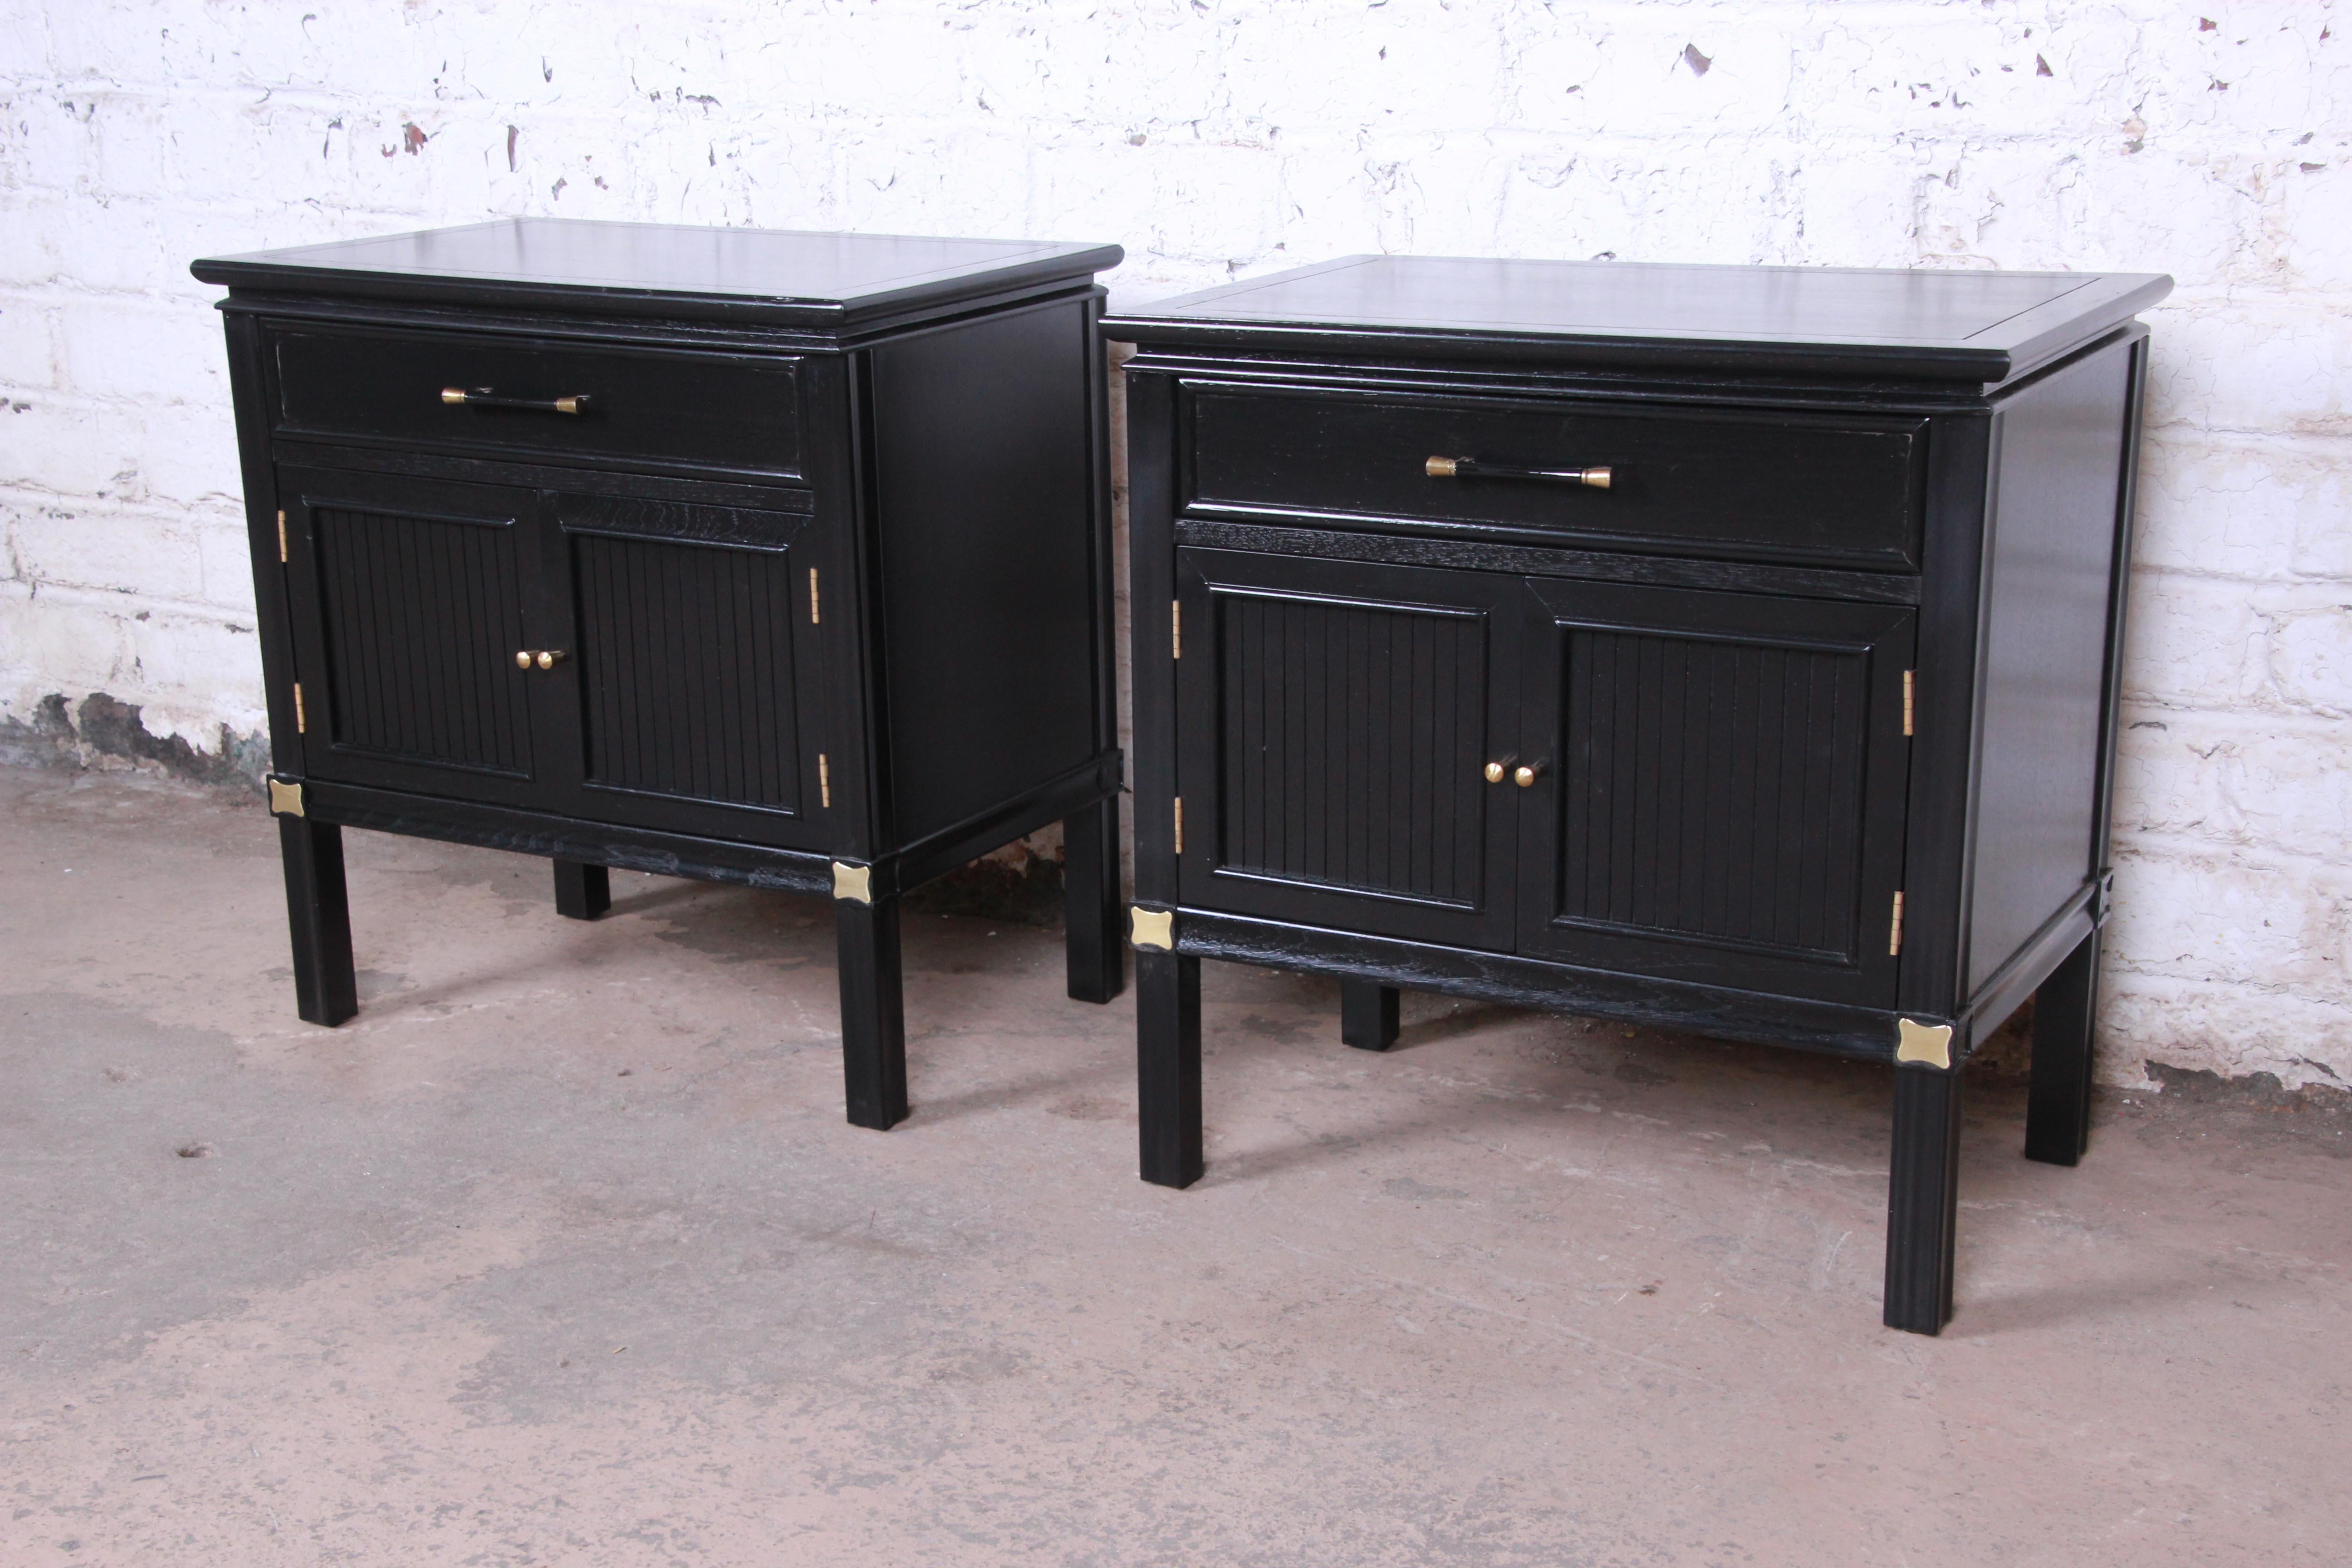 An exceptional pair of Hollywood Regency chinoiserie nightstands or end tables from the Tamerlane Collection by Thomasville. The nightstands feature gorgeous walnut wood grain with a newly ebonized finish and brass hardware and accents. They offer